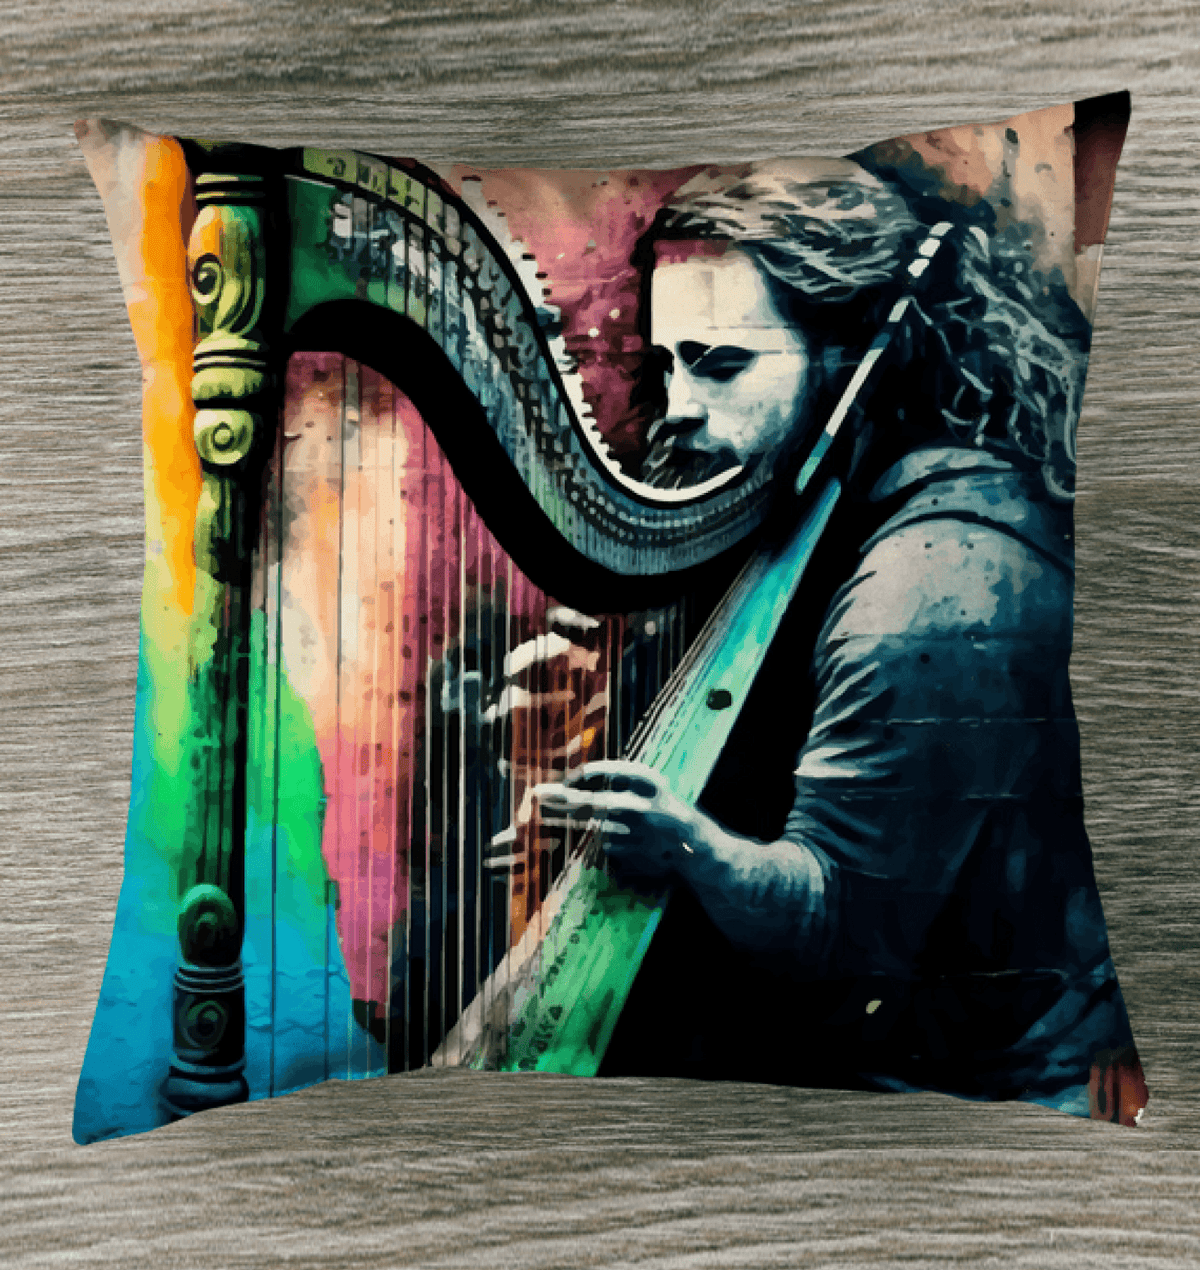 Making Magic With Those Strings Outdoor Pillow - Beyond T-shirts